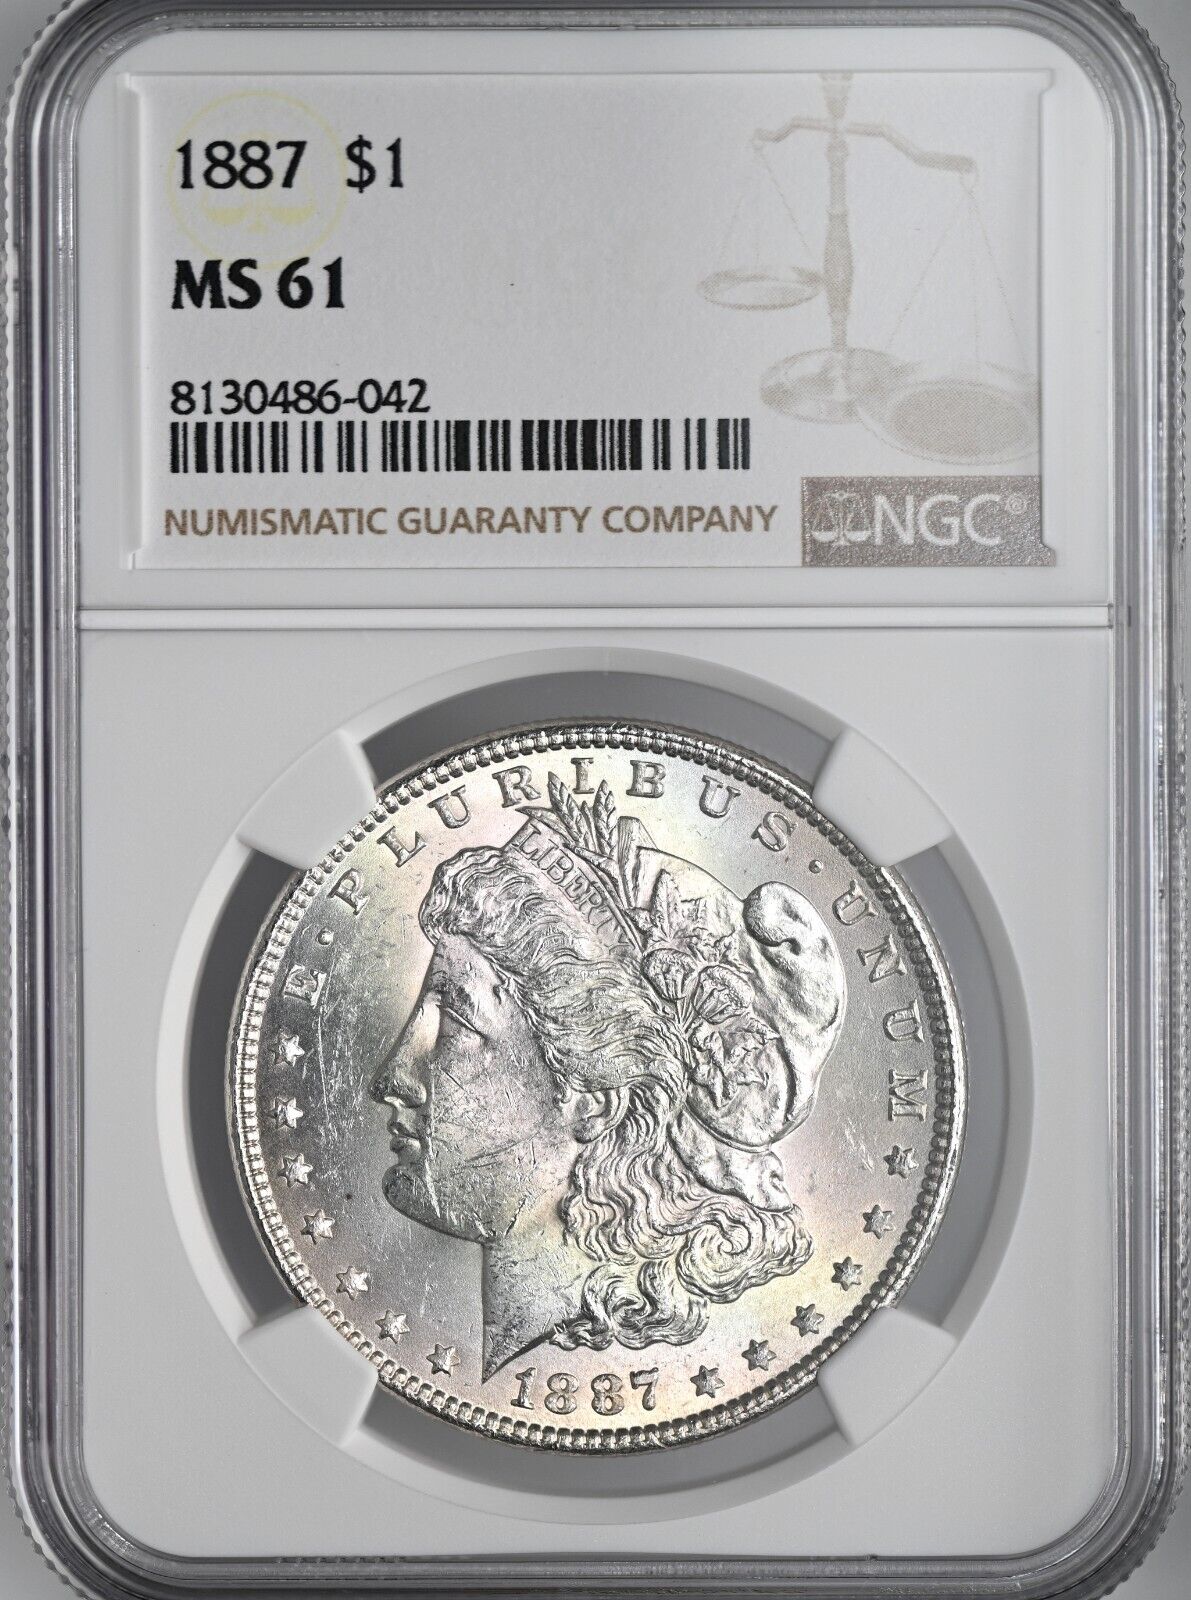 1887-P  $1 MORGAN SILVER DOLLAR MINT STATE NGC MS61 #8130486-042 FRESHLY GRADED